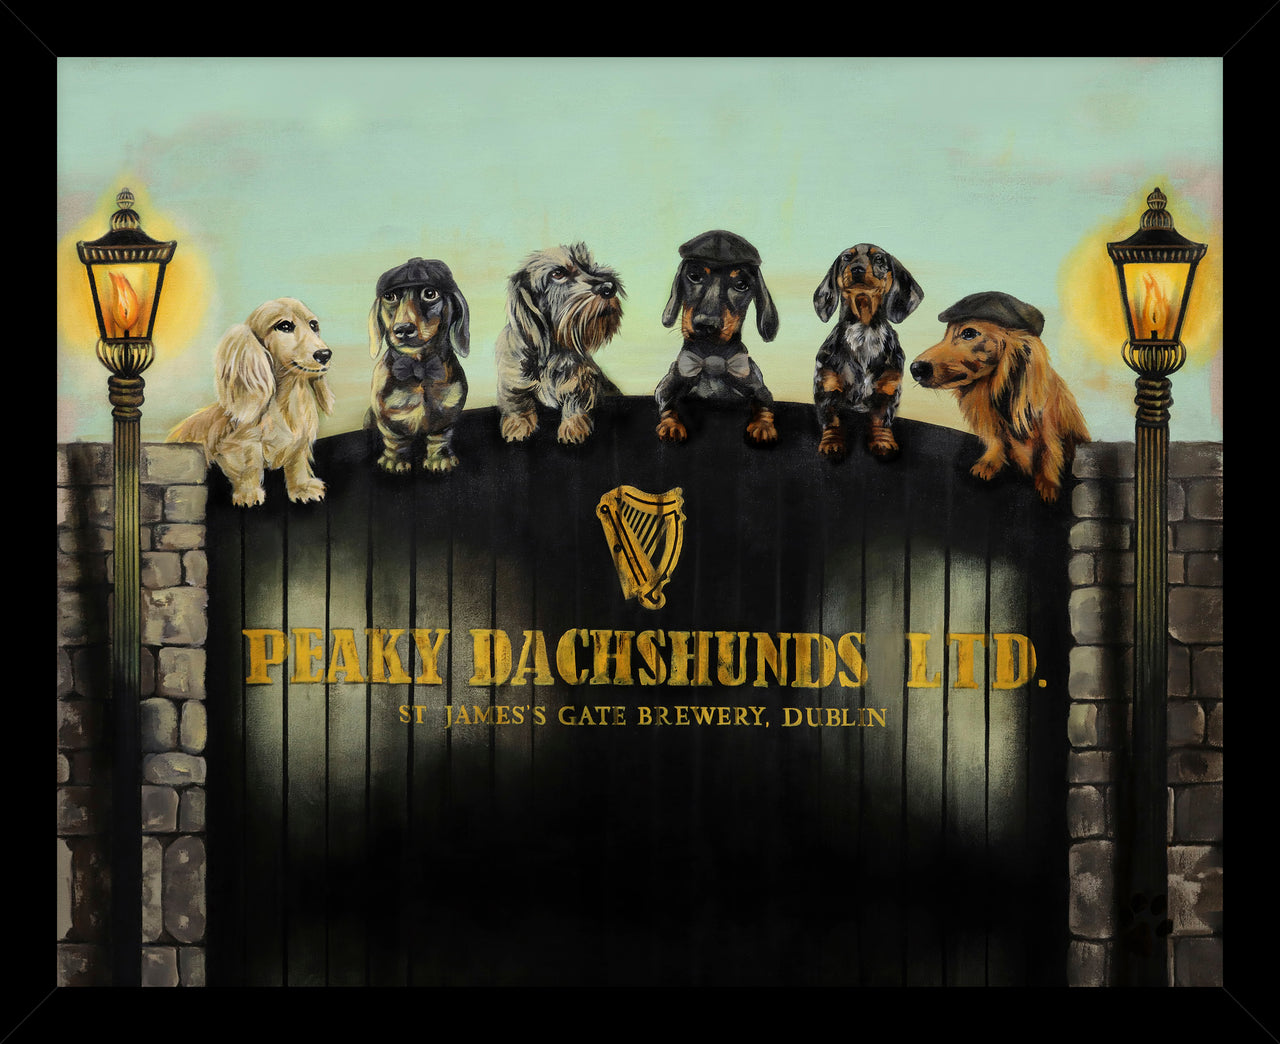 Peaky Dachsunds SE - A22